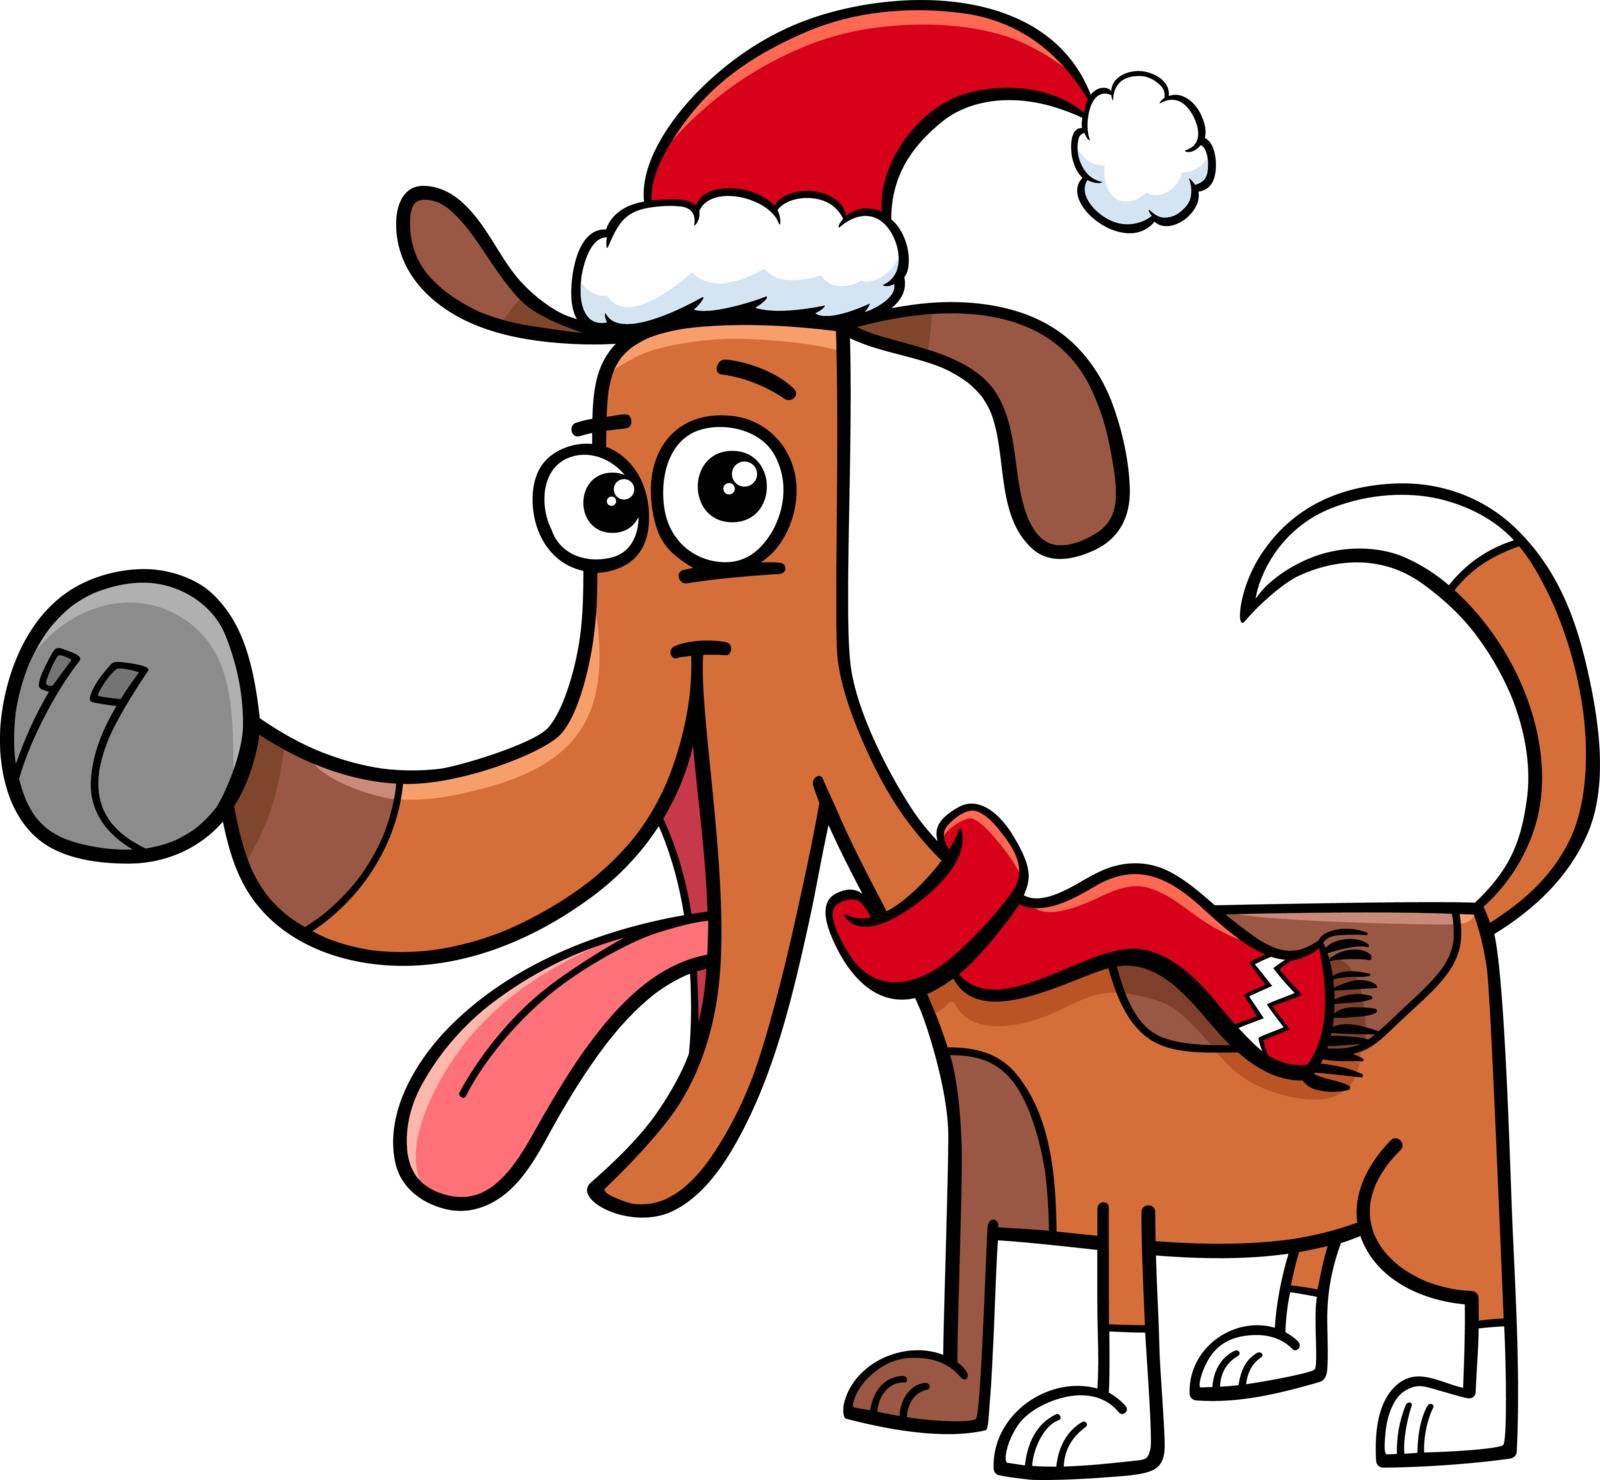 Cartoon Illustration of Dog or Puppy Animal Character with Scarf on Christmas Time